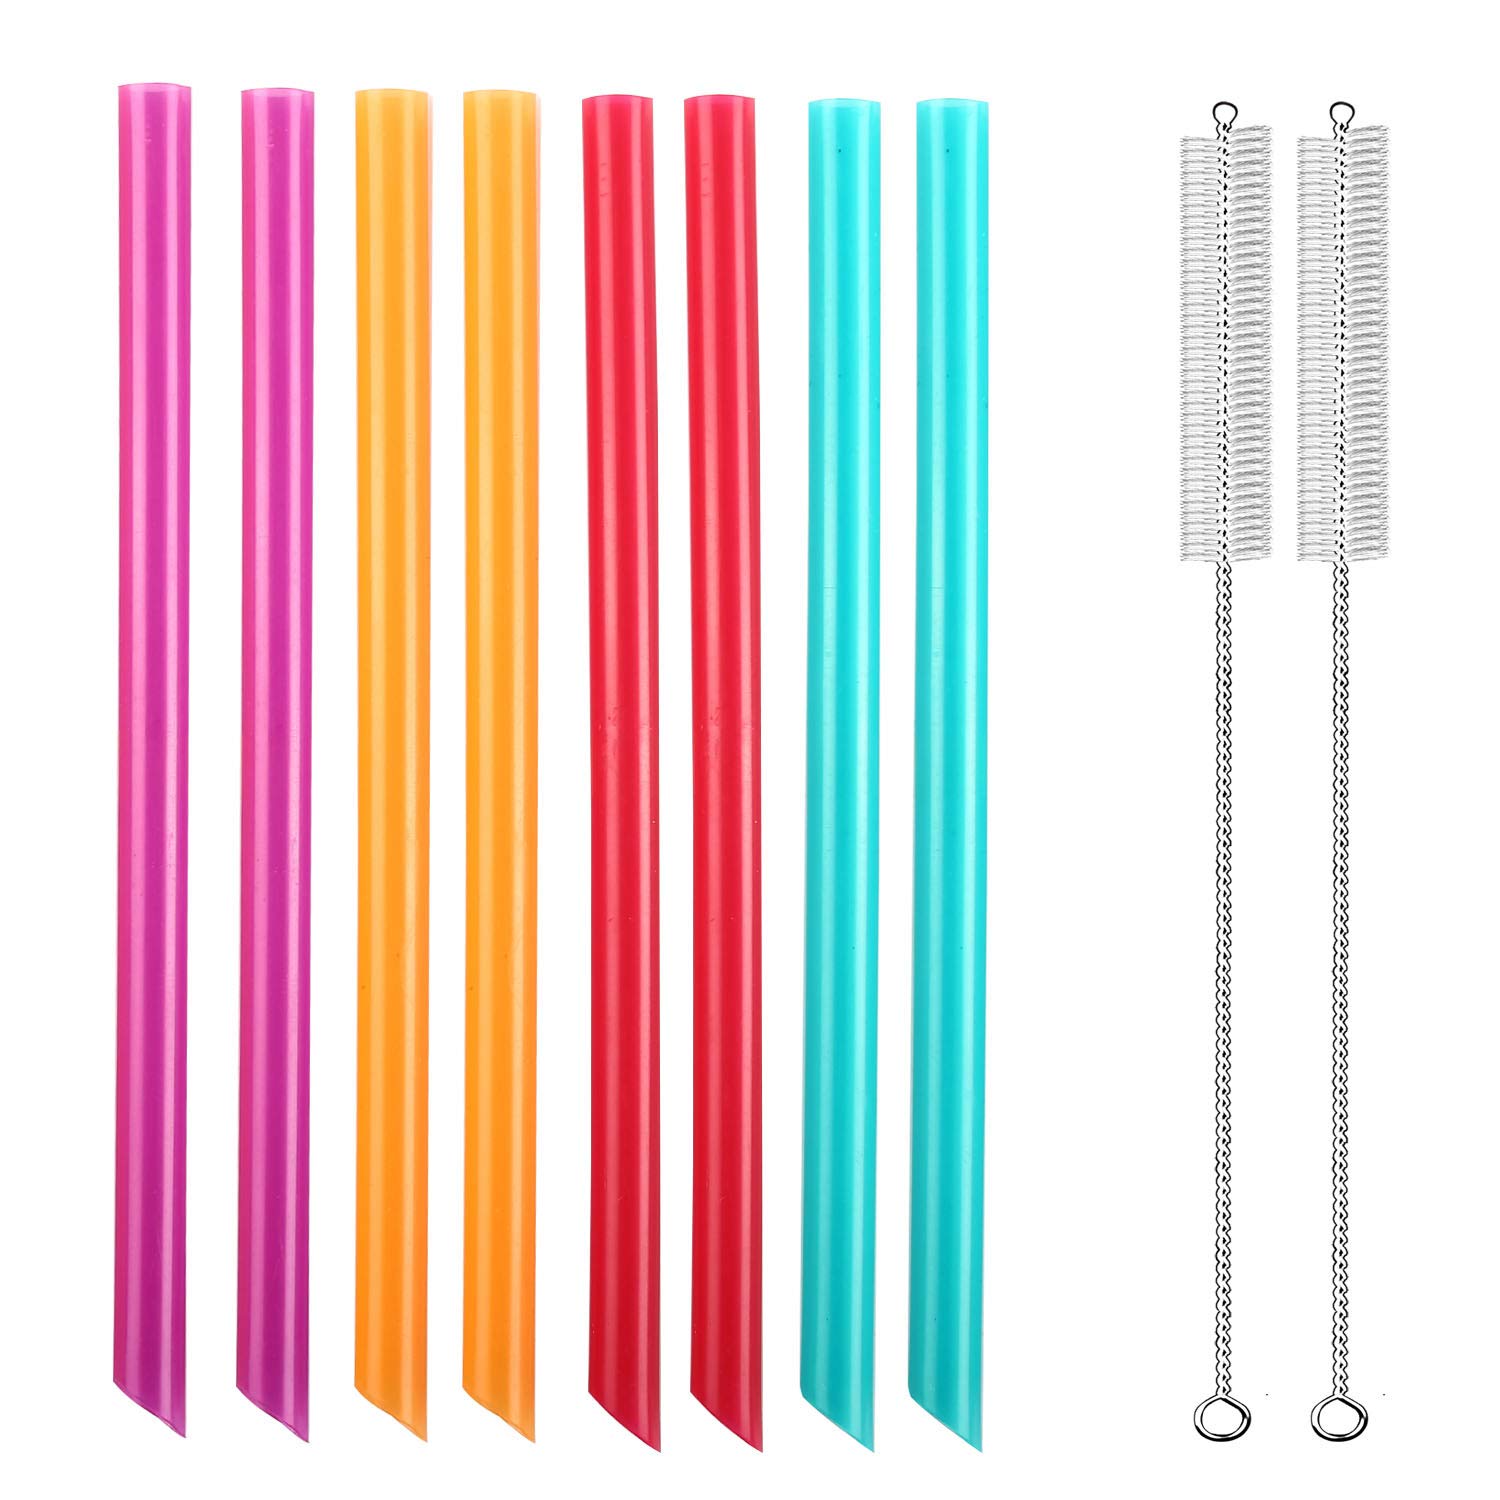 Angled Tips 8 Pieces Reusable Boba Straws and Smoothie Straws, Extra Wide Great for Bubble Tea, Boba Pearls, and Thick Drinks with 2 Cleaning Brushes, BPA Free and Eco-friendly